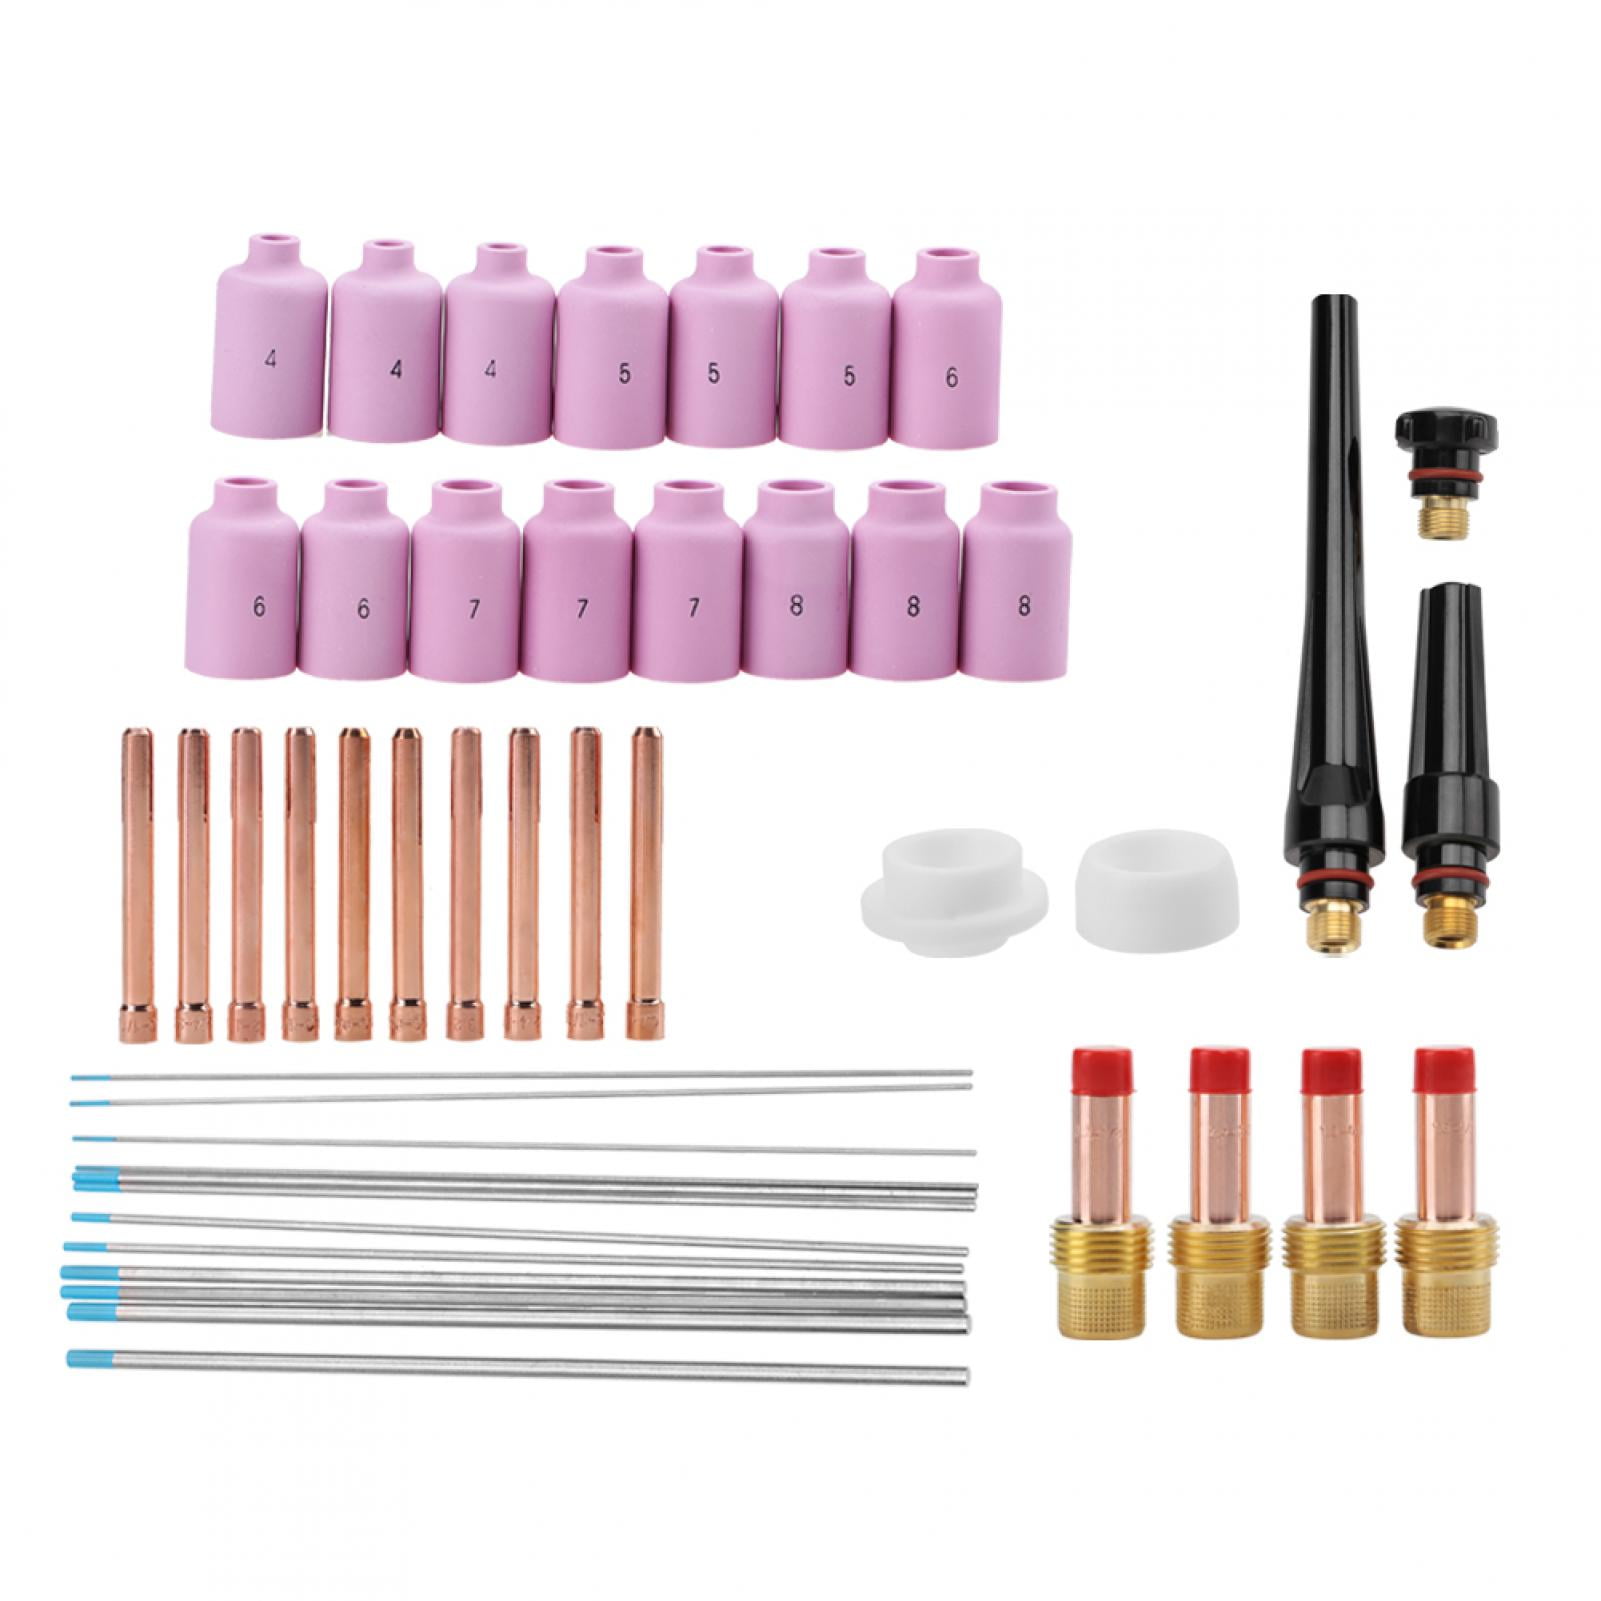 816g for Replacement for Cutting Project Ceramic 46pcs Welding Torch Nozzle TIG Nozzles Solid High Temperature Resistance 